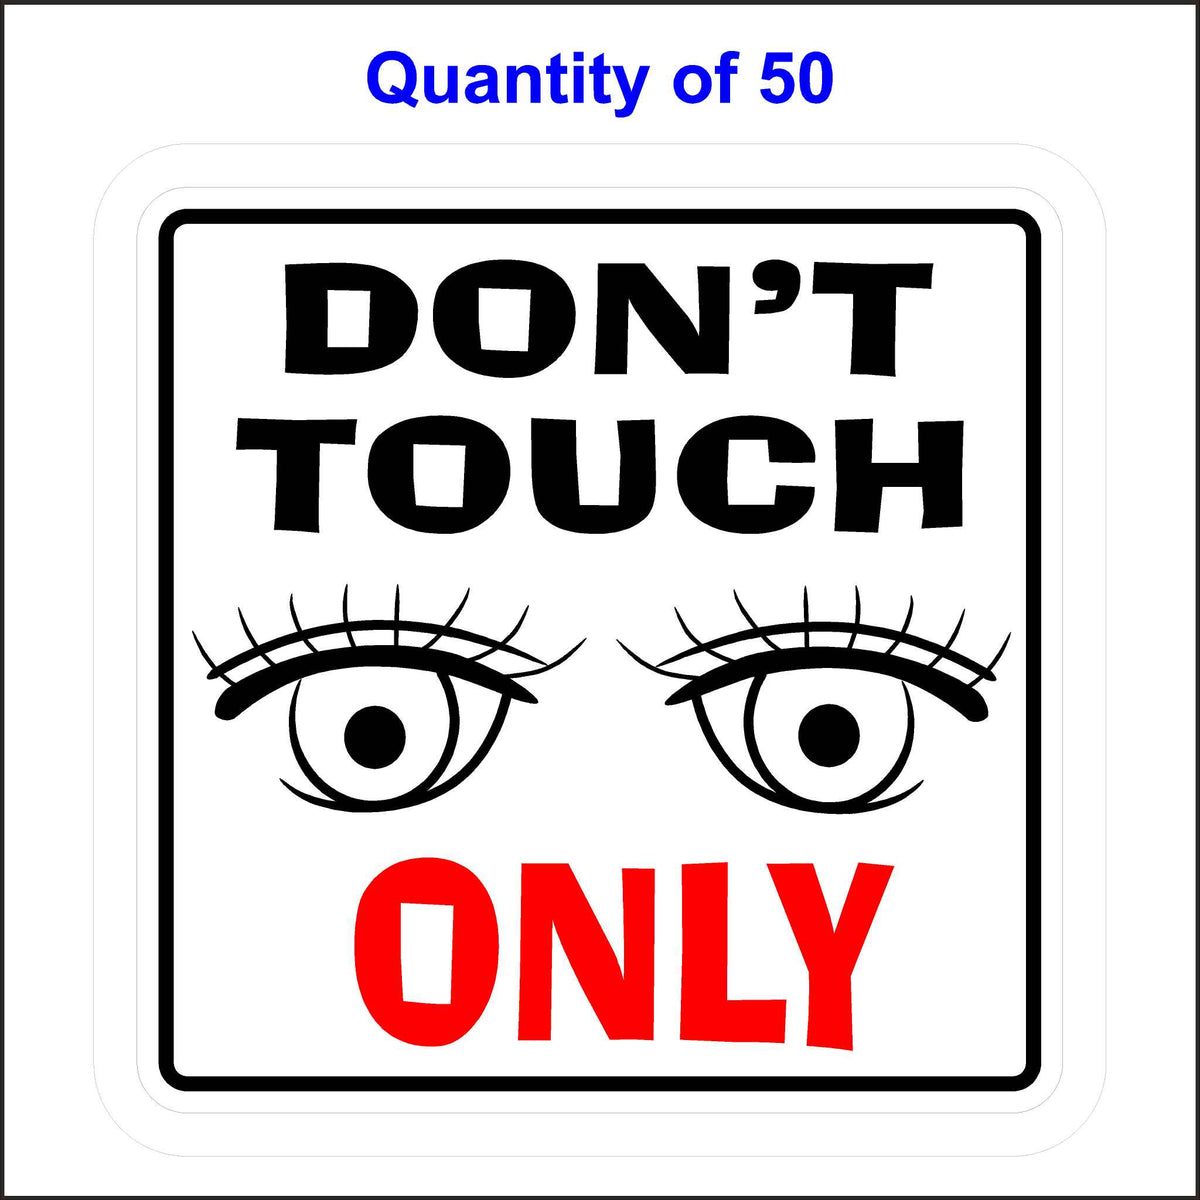 Don’t Touch, Look Only Sticker. Black and Red Text With Eyeballs Looking At You. 50 Quantity.